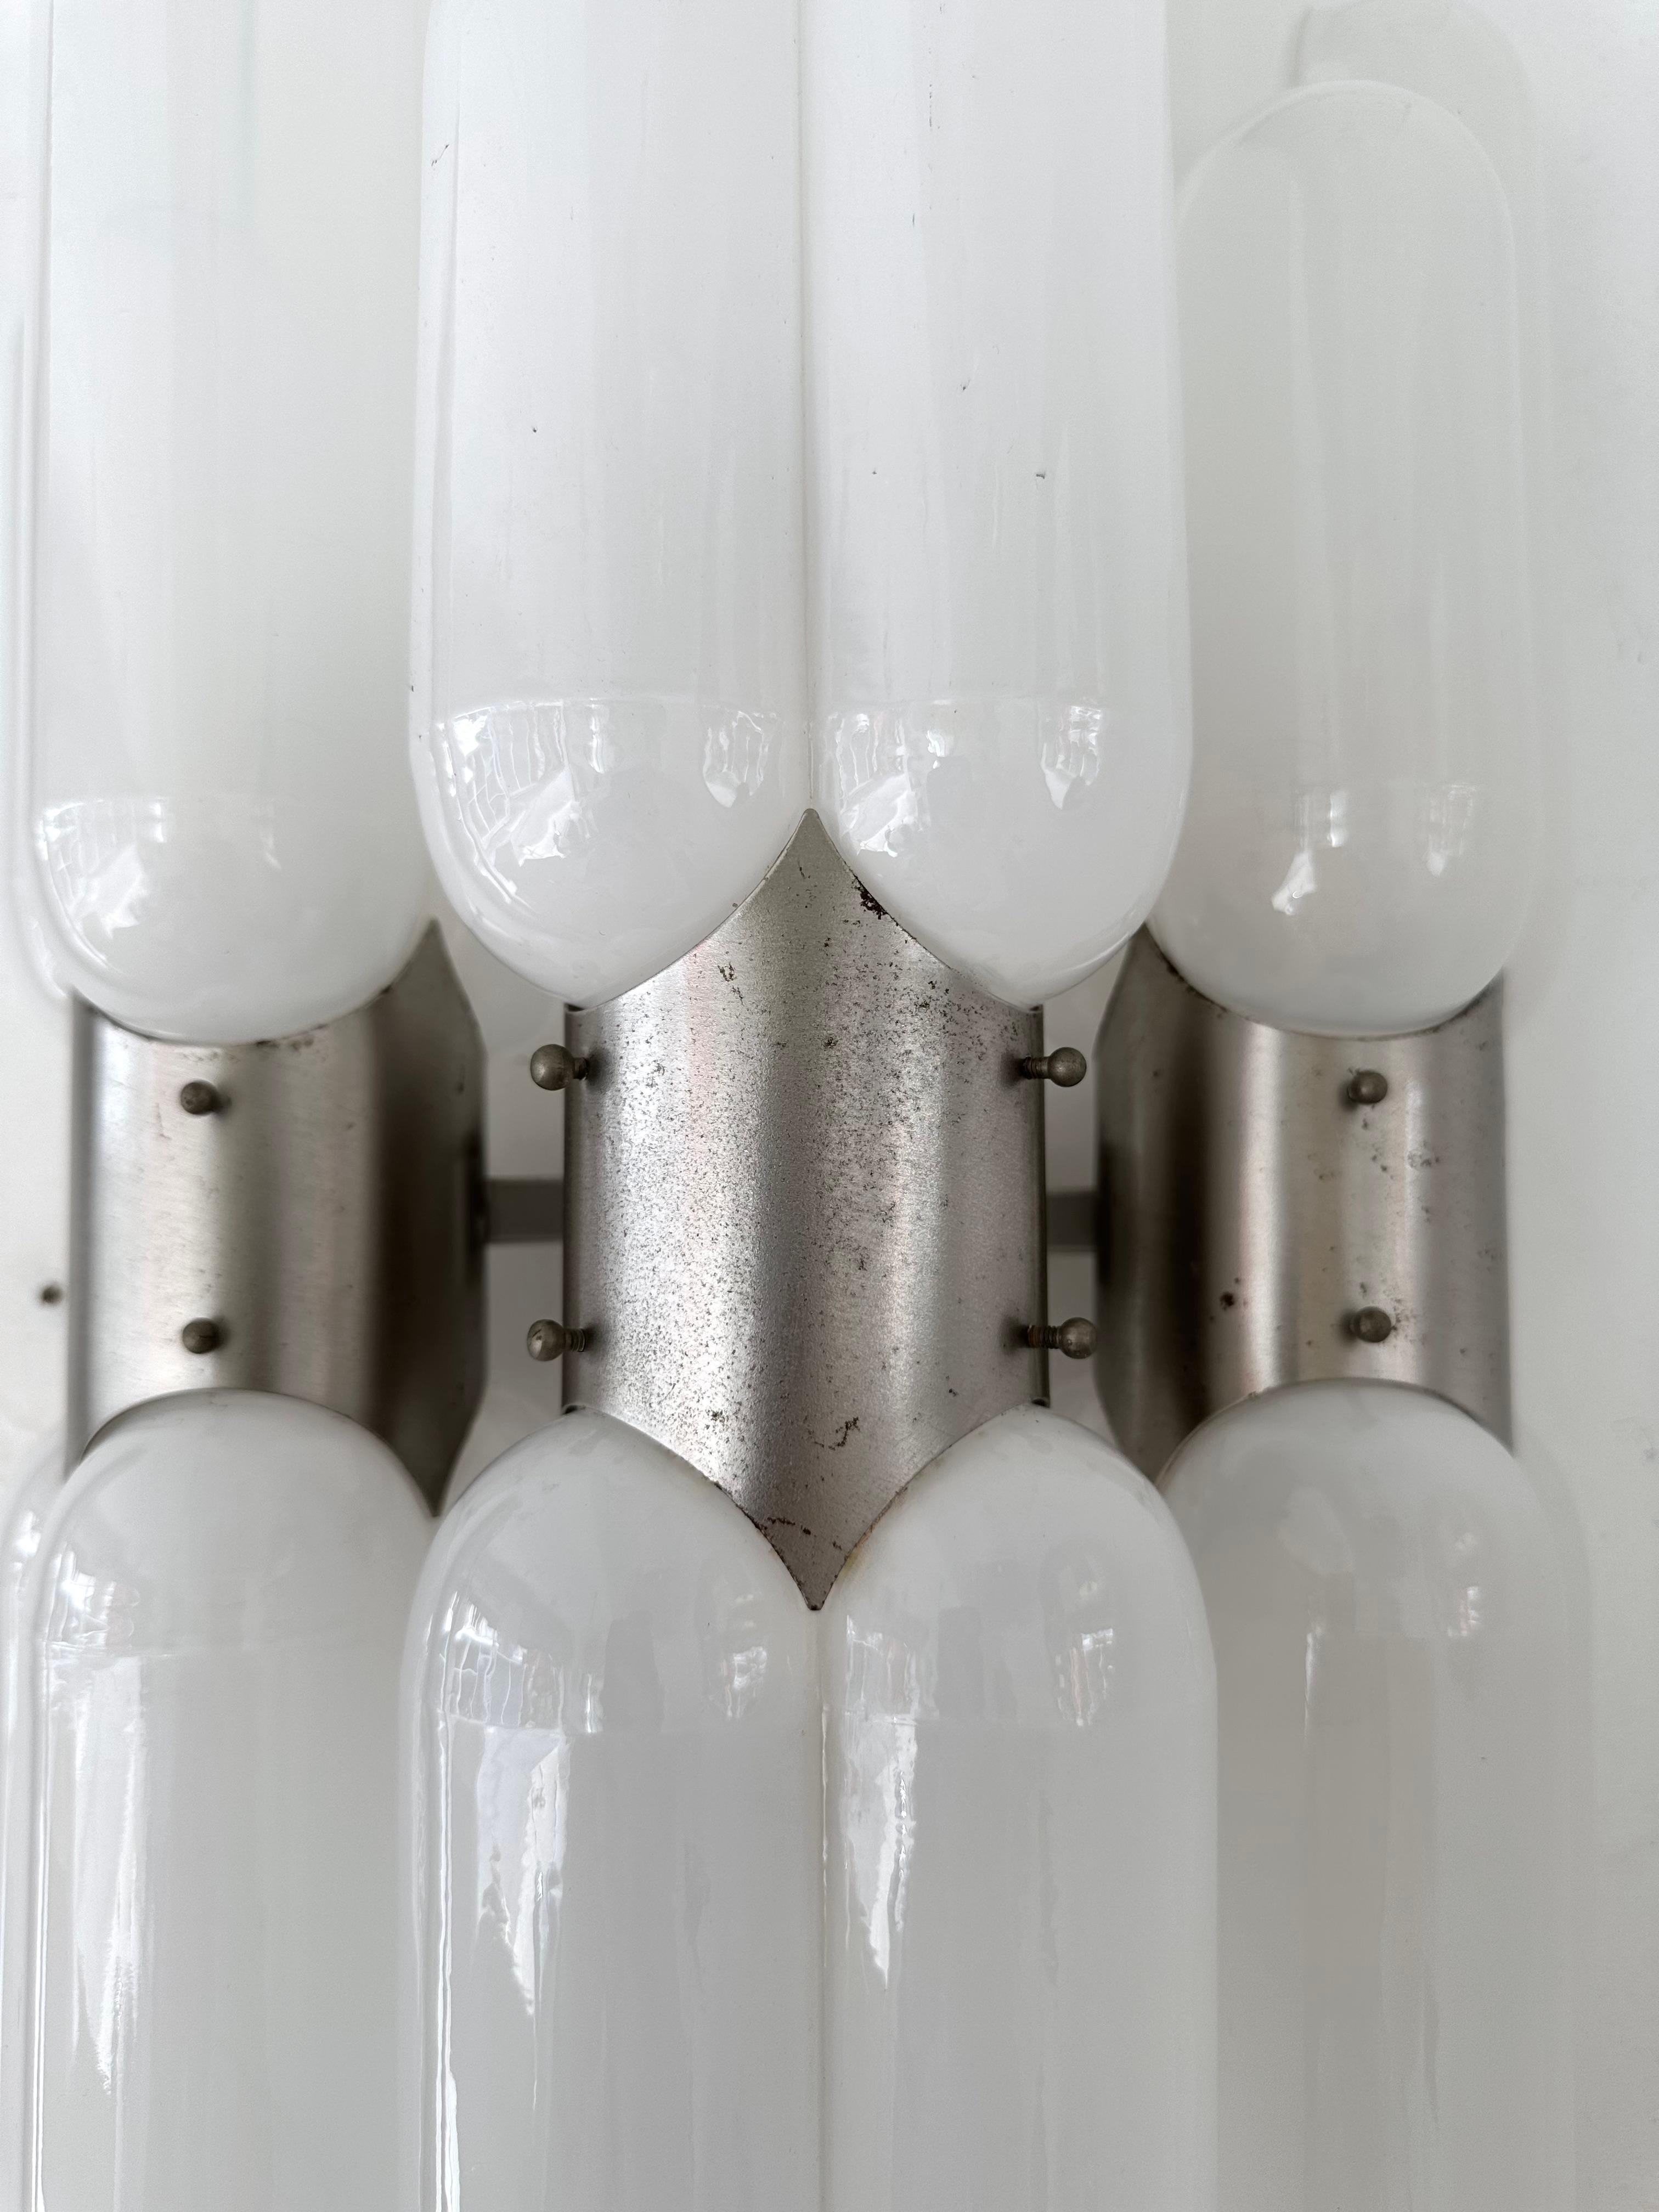 Pair of Torpedo Murano Glass Sconces by Carlo Nason for Mazzega, Italy, 1970s For Sale 1